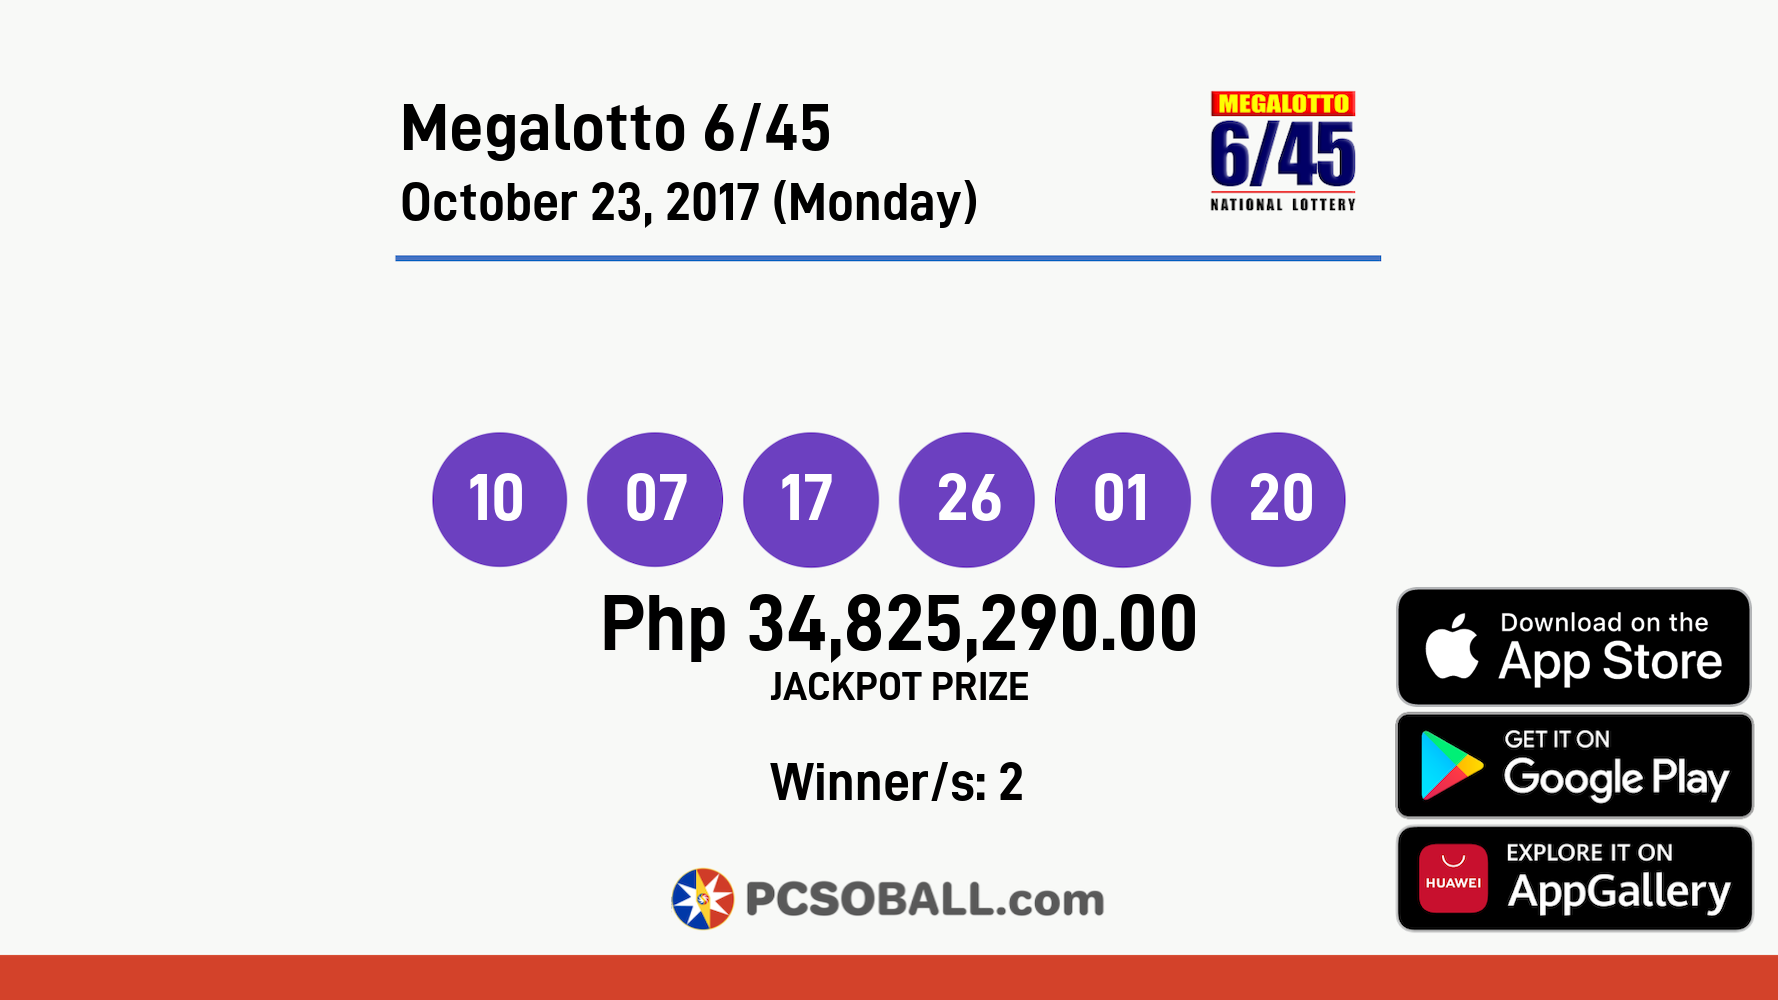 Megalotto 6/45 October 23, 2017 (Monday) Result